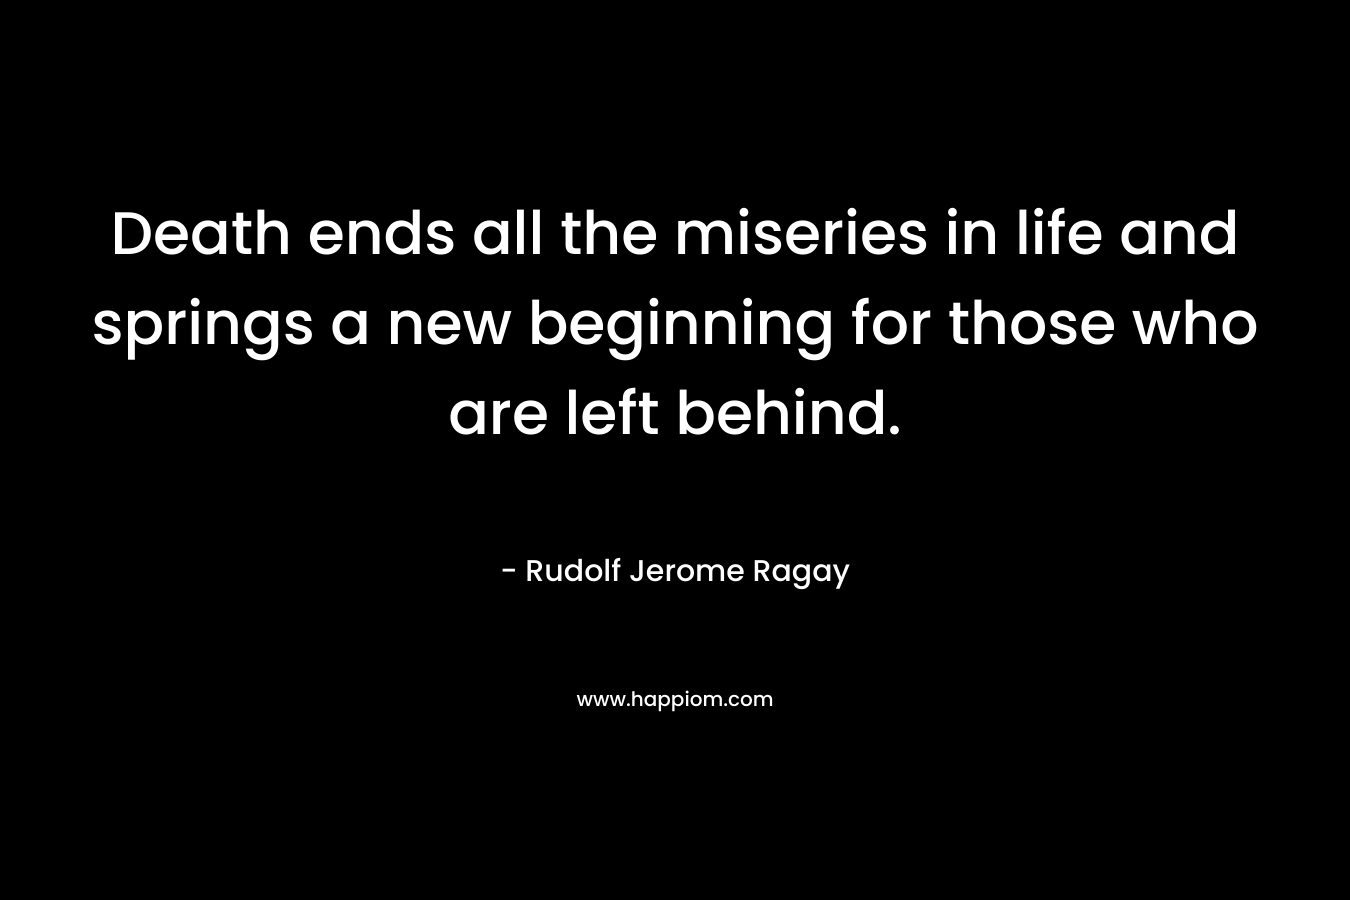 Death ends all the miseries in life and springs a new beginning for those who are left behind. – Rudolf Jerome Ragay